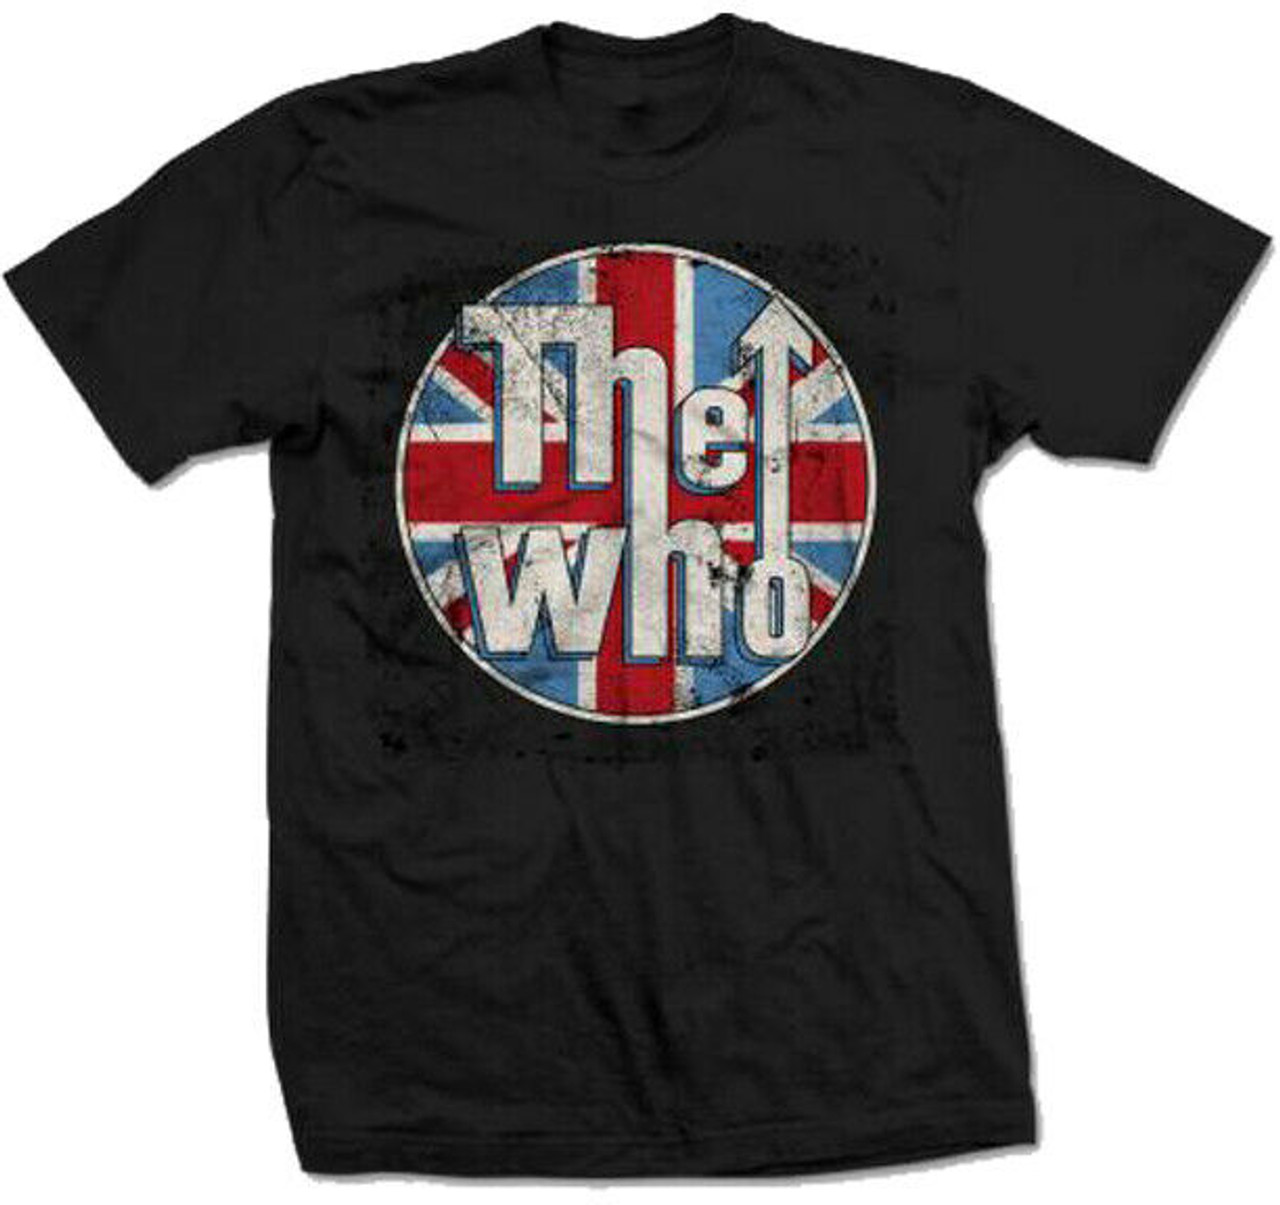 Paradoks spektrum Ritual The WHo Distressed Union Jack British Classic Rock Music Band T Shirt  15841122 - Fearless Apparel